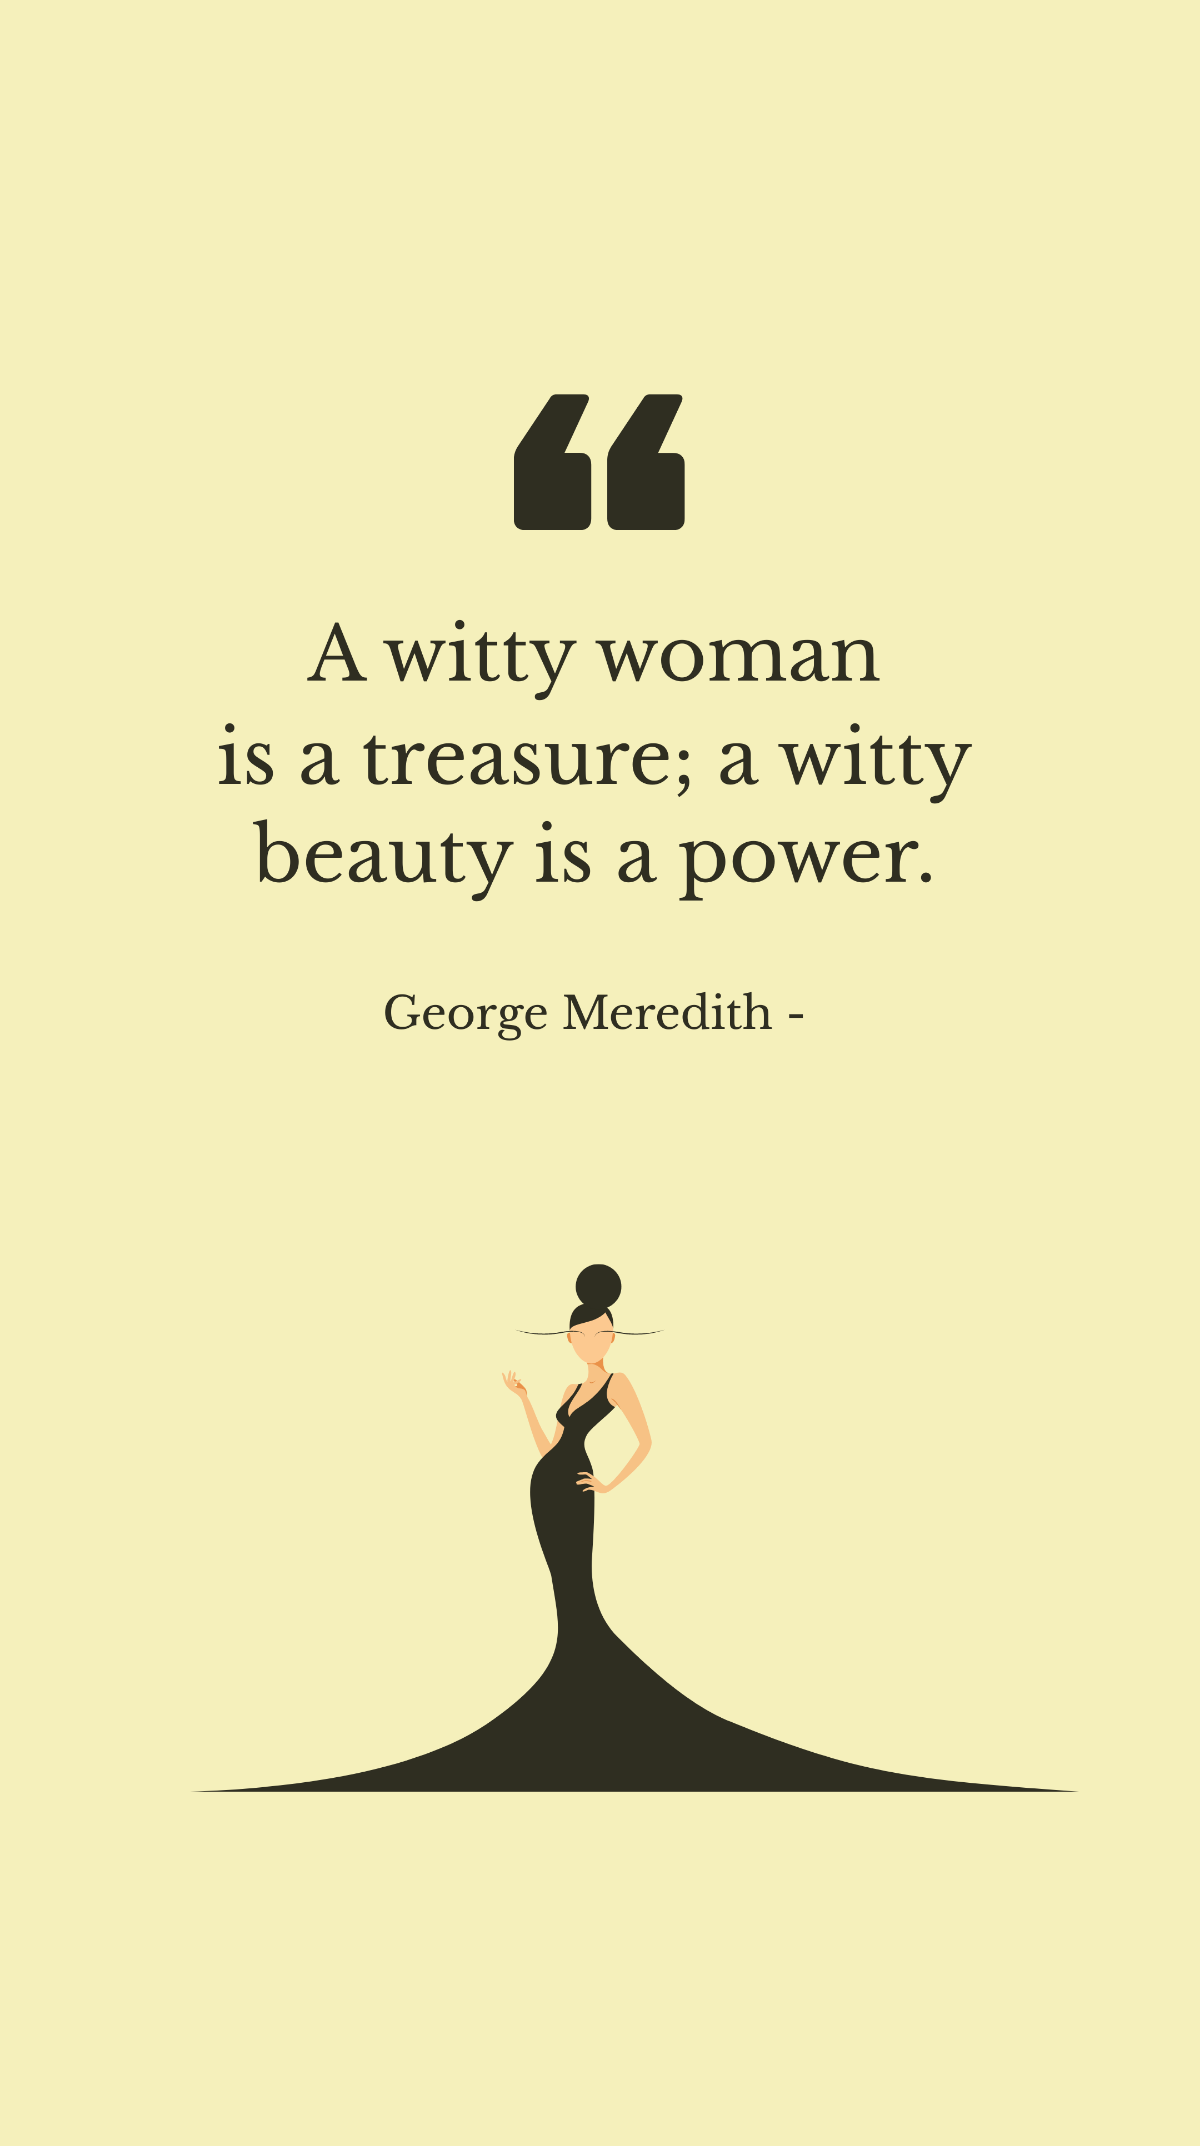 George Meredith - A witty woman is a treasure; a witty beauty is a power.